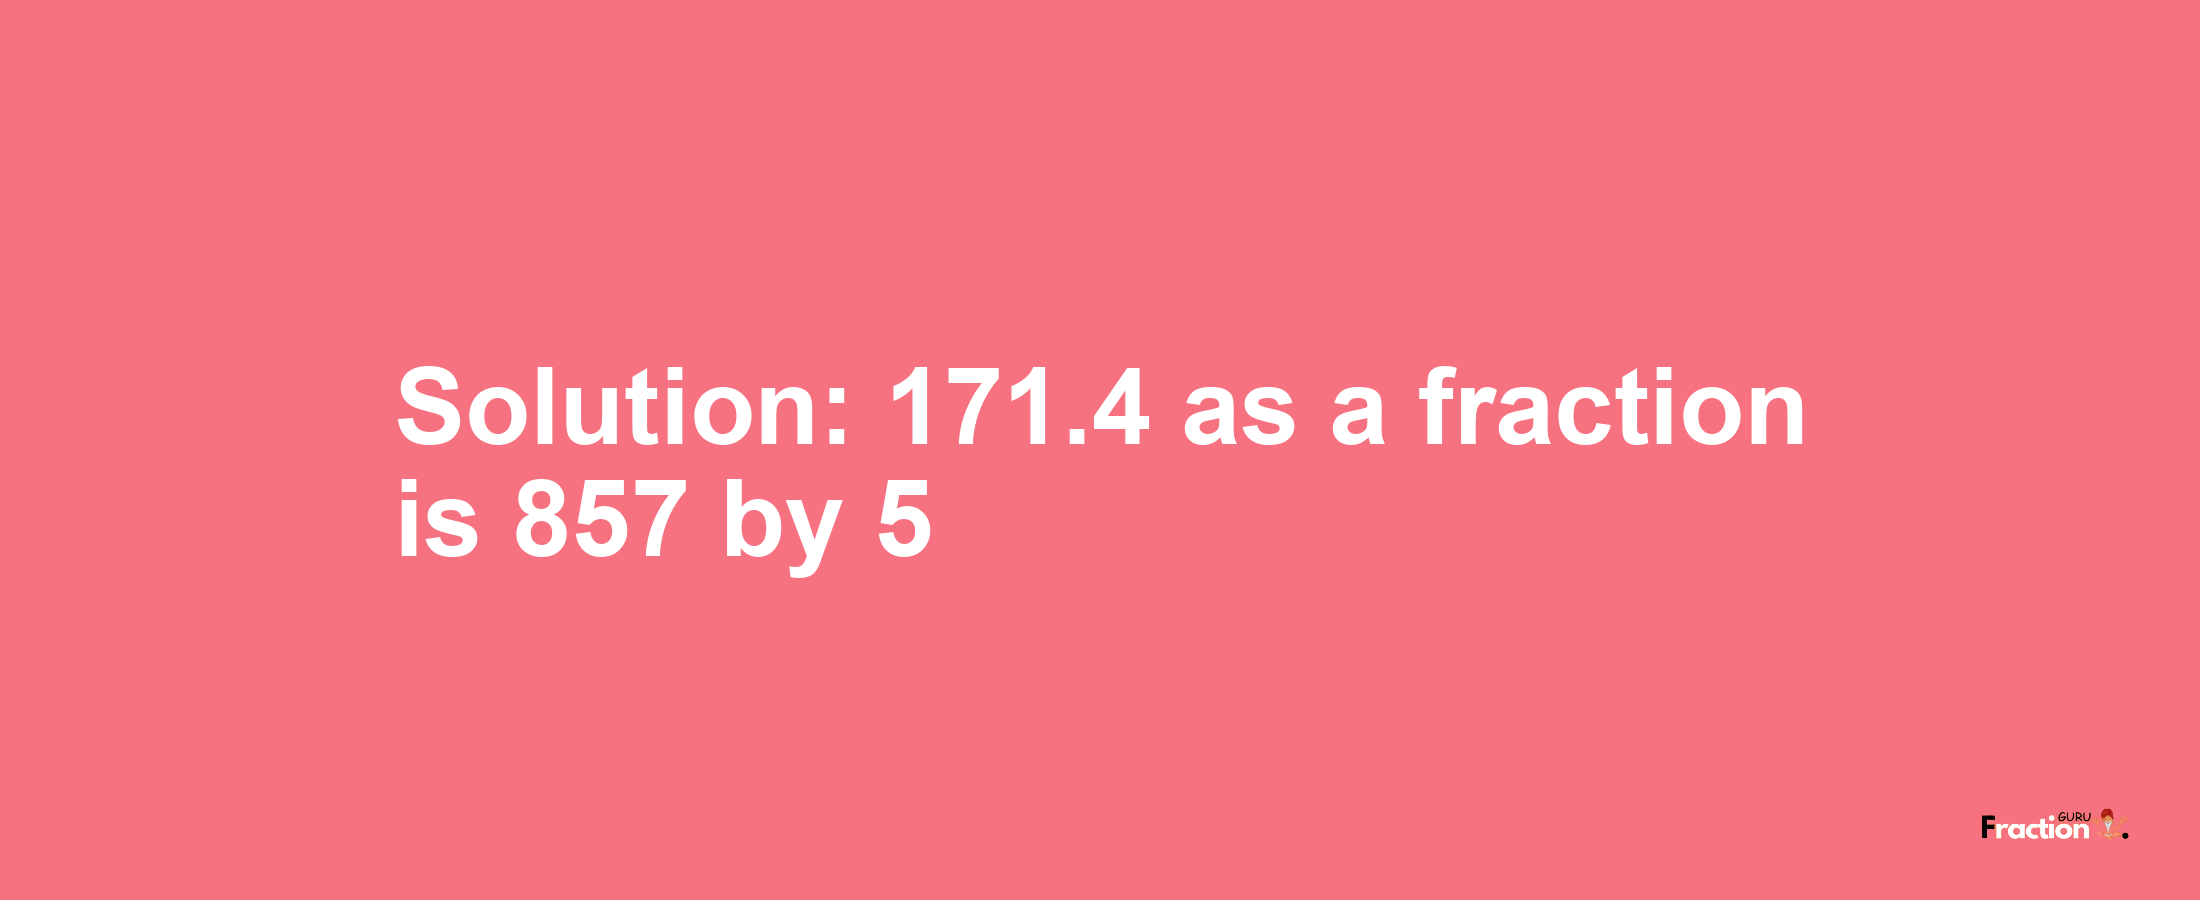 Solution:171.4 as a fraction is 857/5